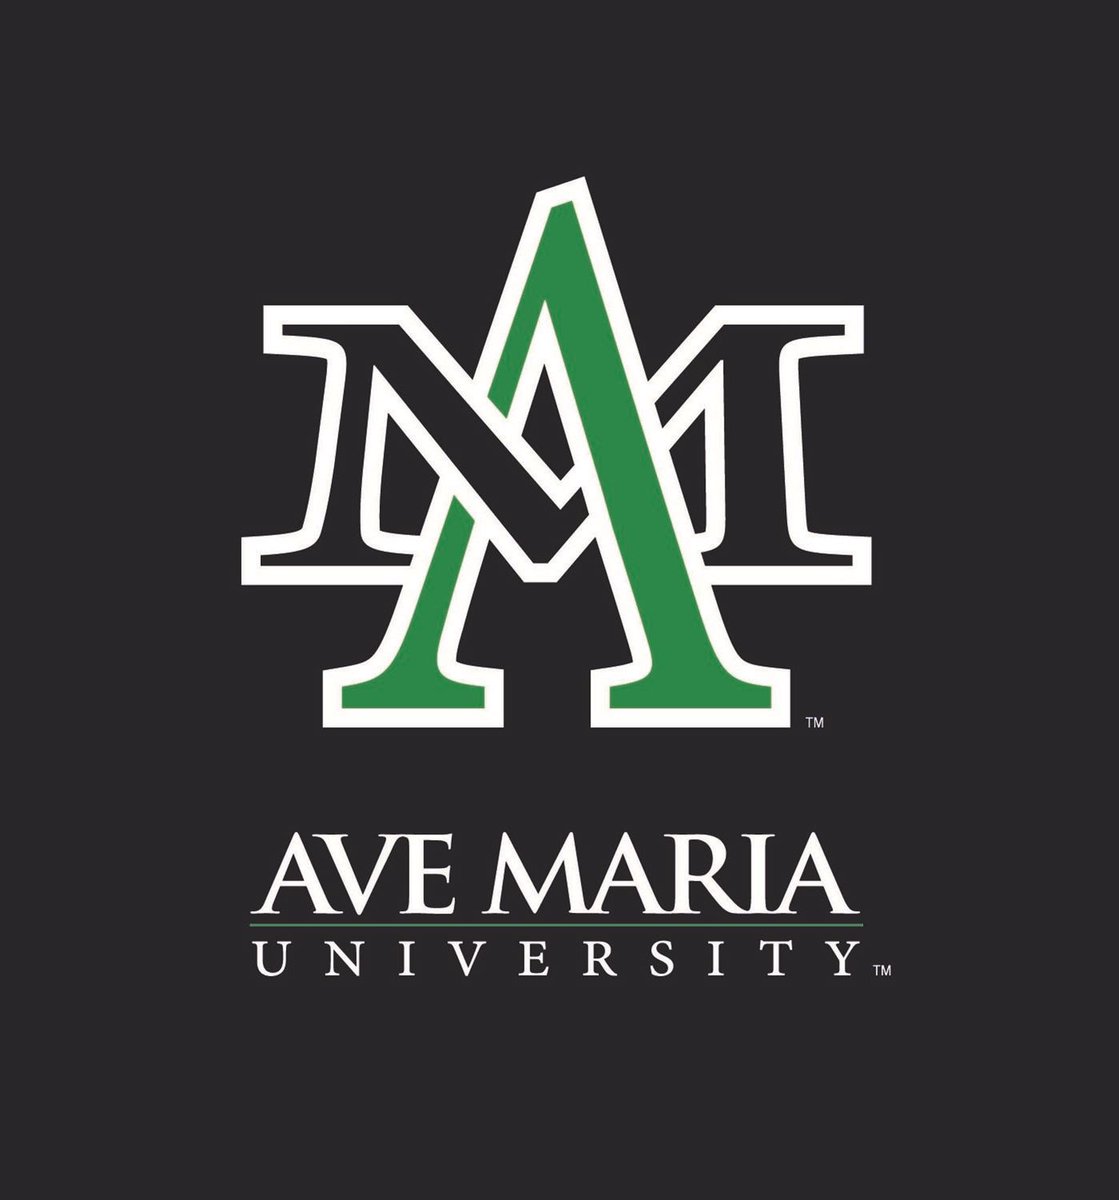 🚨ATTENTION ALL WBB 2024's🚨
We at Ave Maria University are starting our recruitment for this upcoming year.  Feel free to drop your info below or DM.  Come join us in our BRAND-NEW FACILITIES!
➡️High-Academic
➡️Strong Faith
➡️💯 Effort at All Times
#AudienceofOne #GyreneParadise